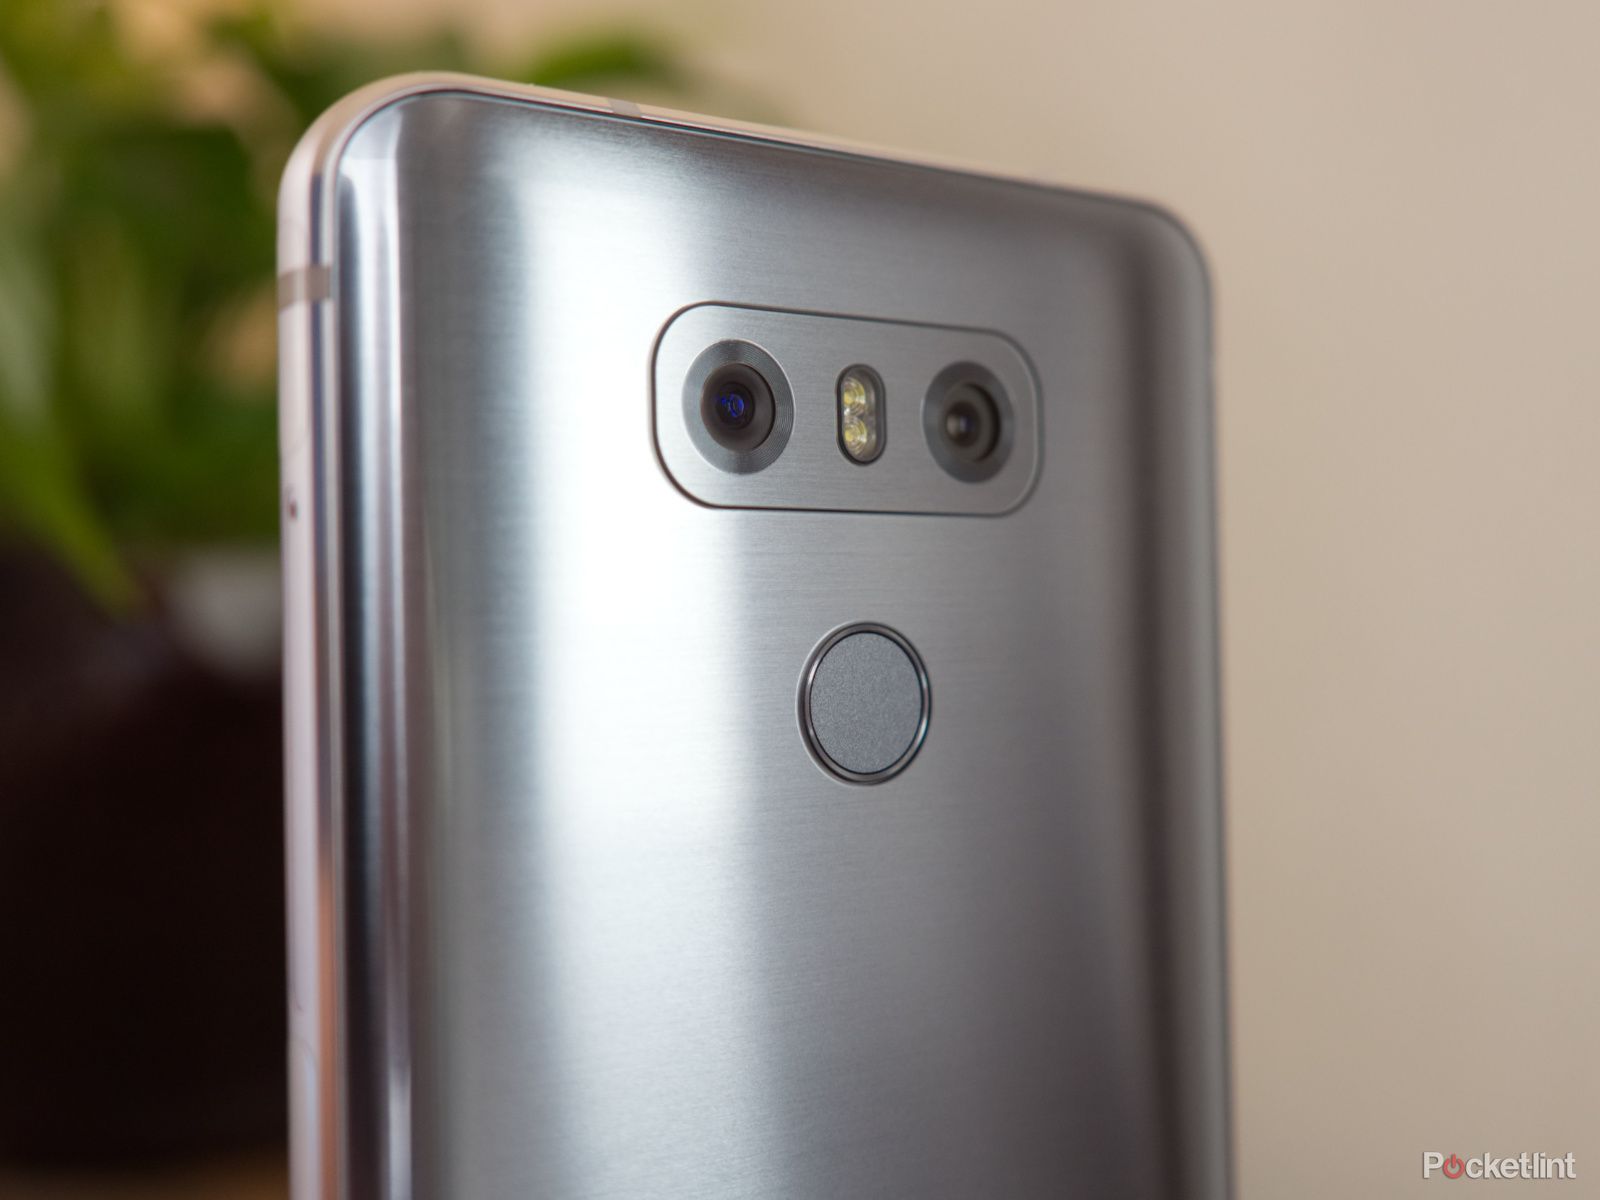 Leaked LG G7 ThinQ documents reveal heavy focus on camera and AI tech image 1